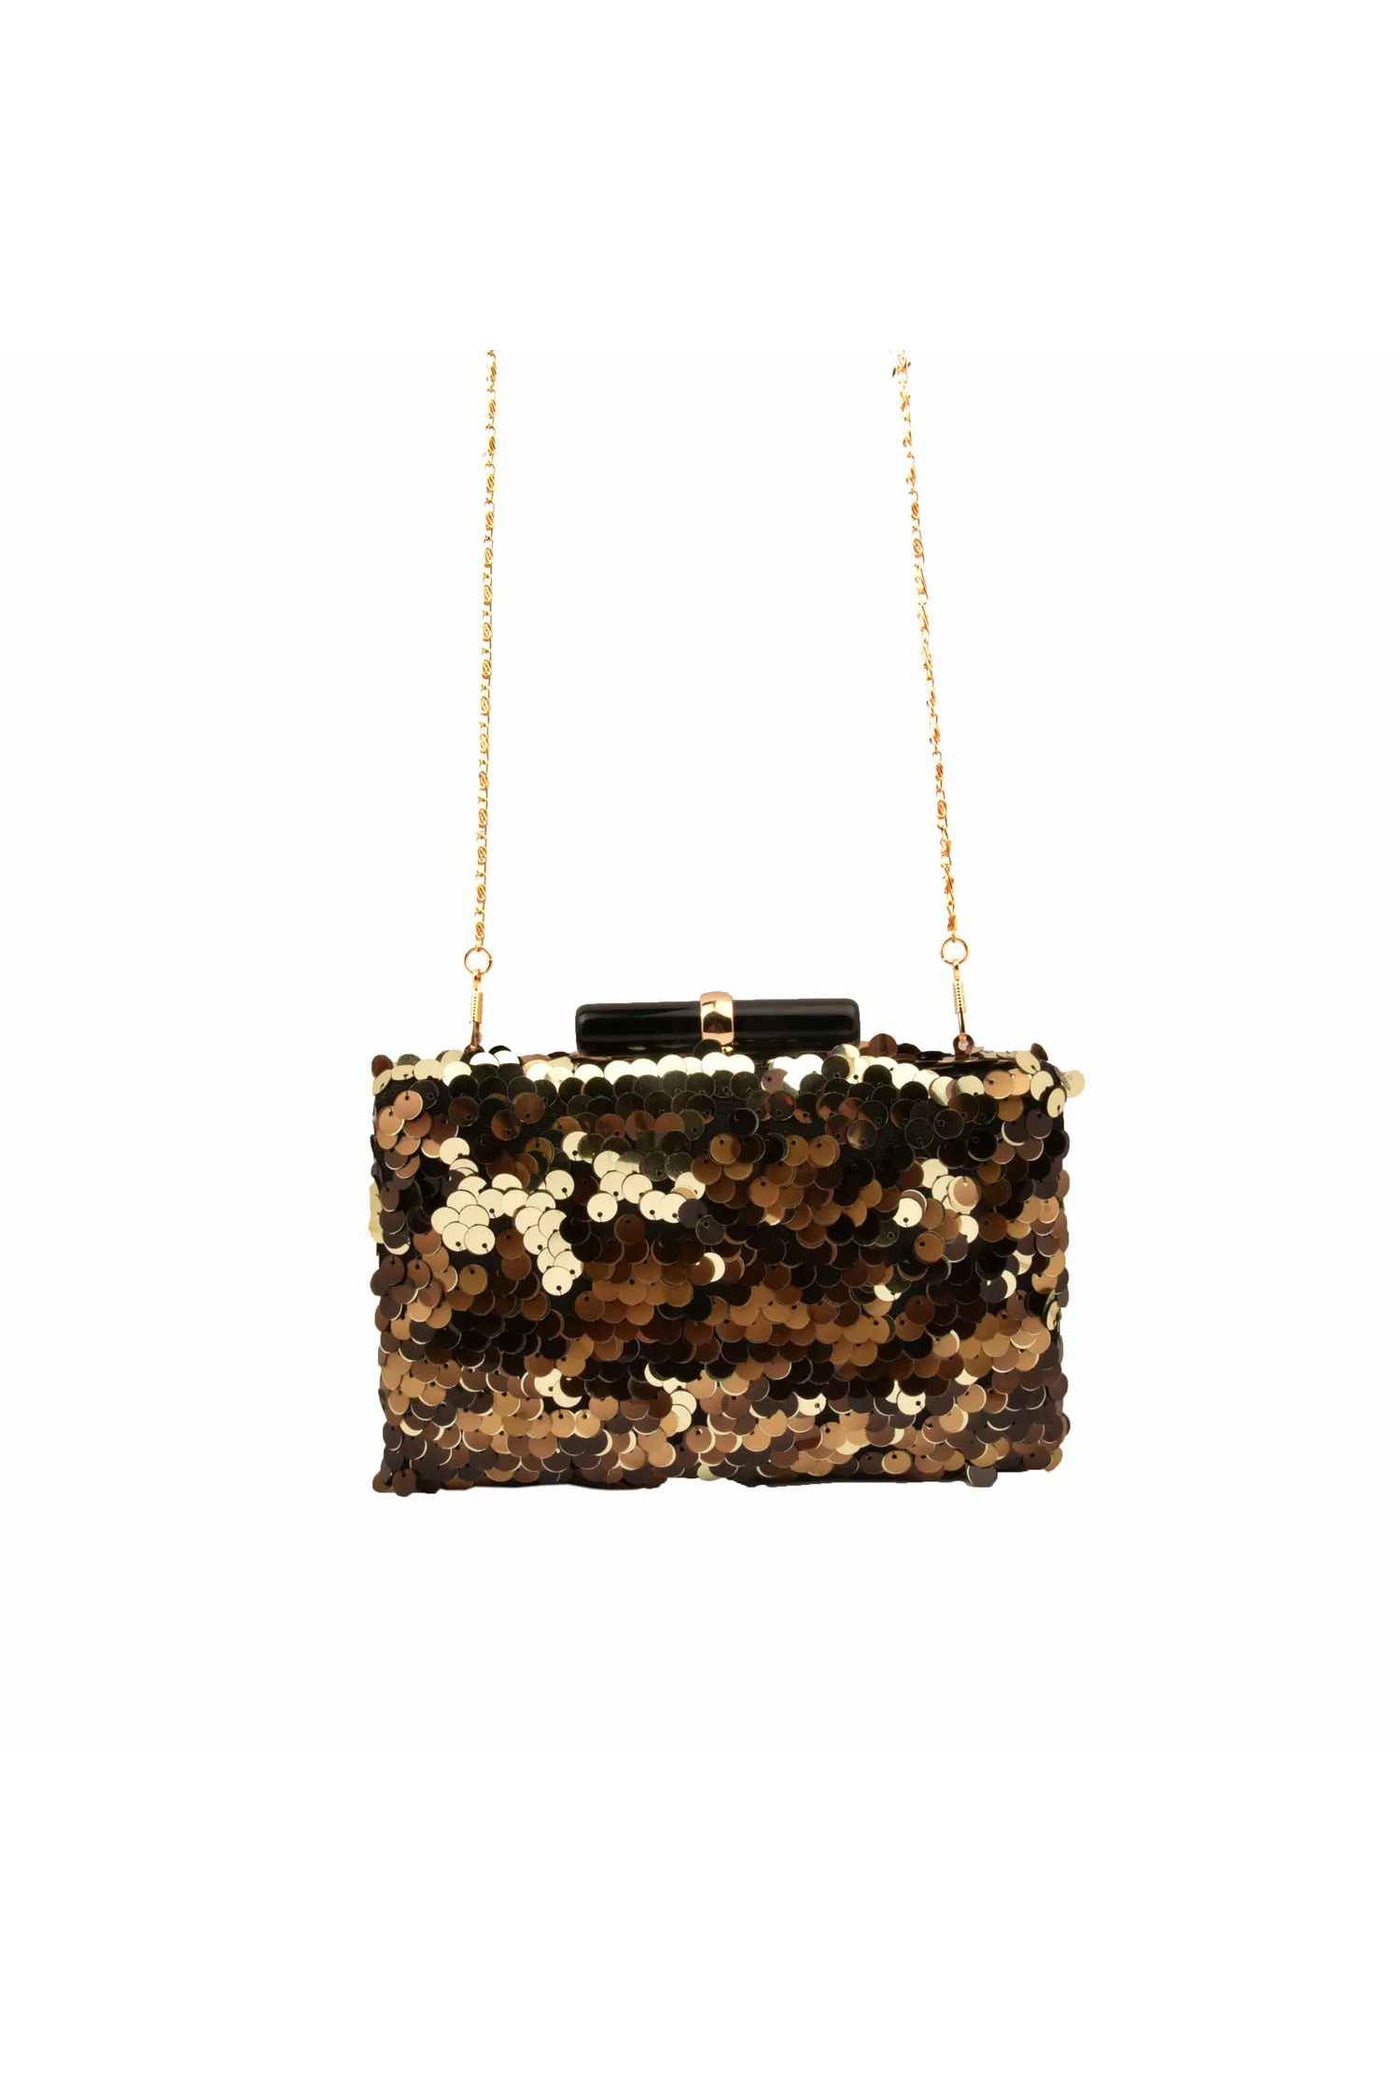 Black,Brown and Gold Sequins Party Clutch